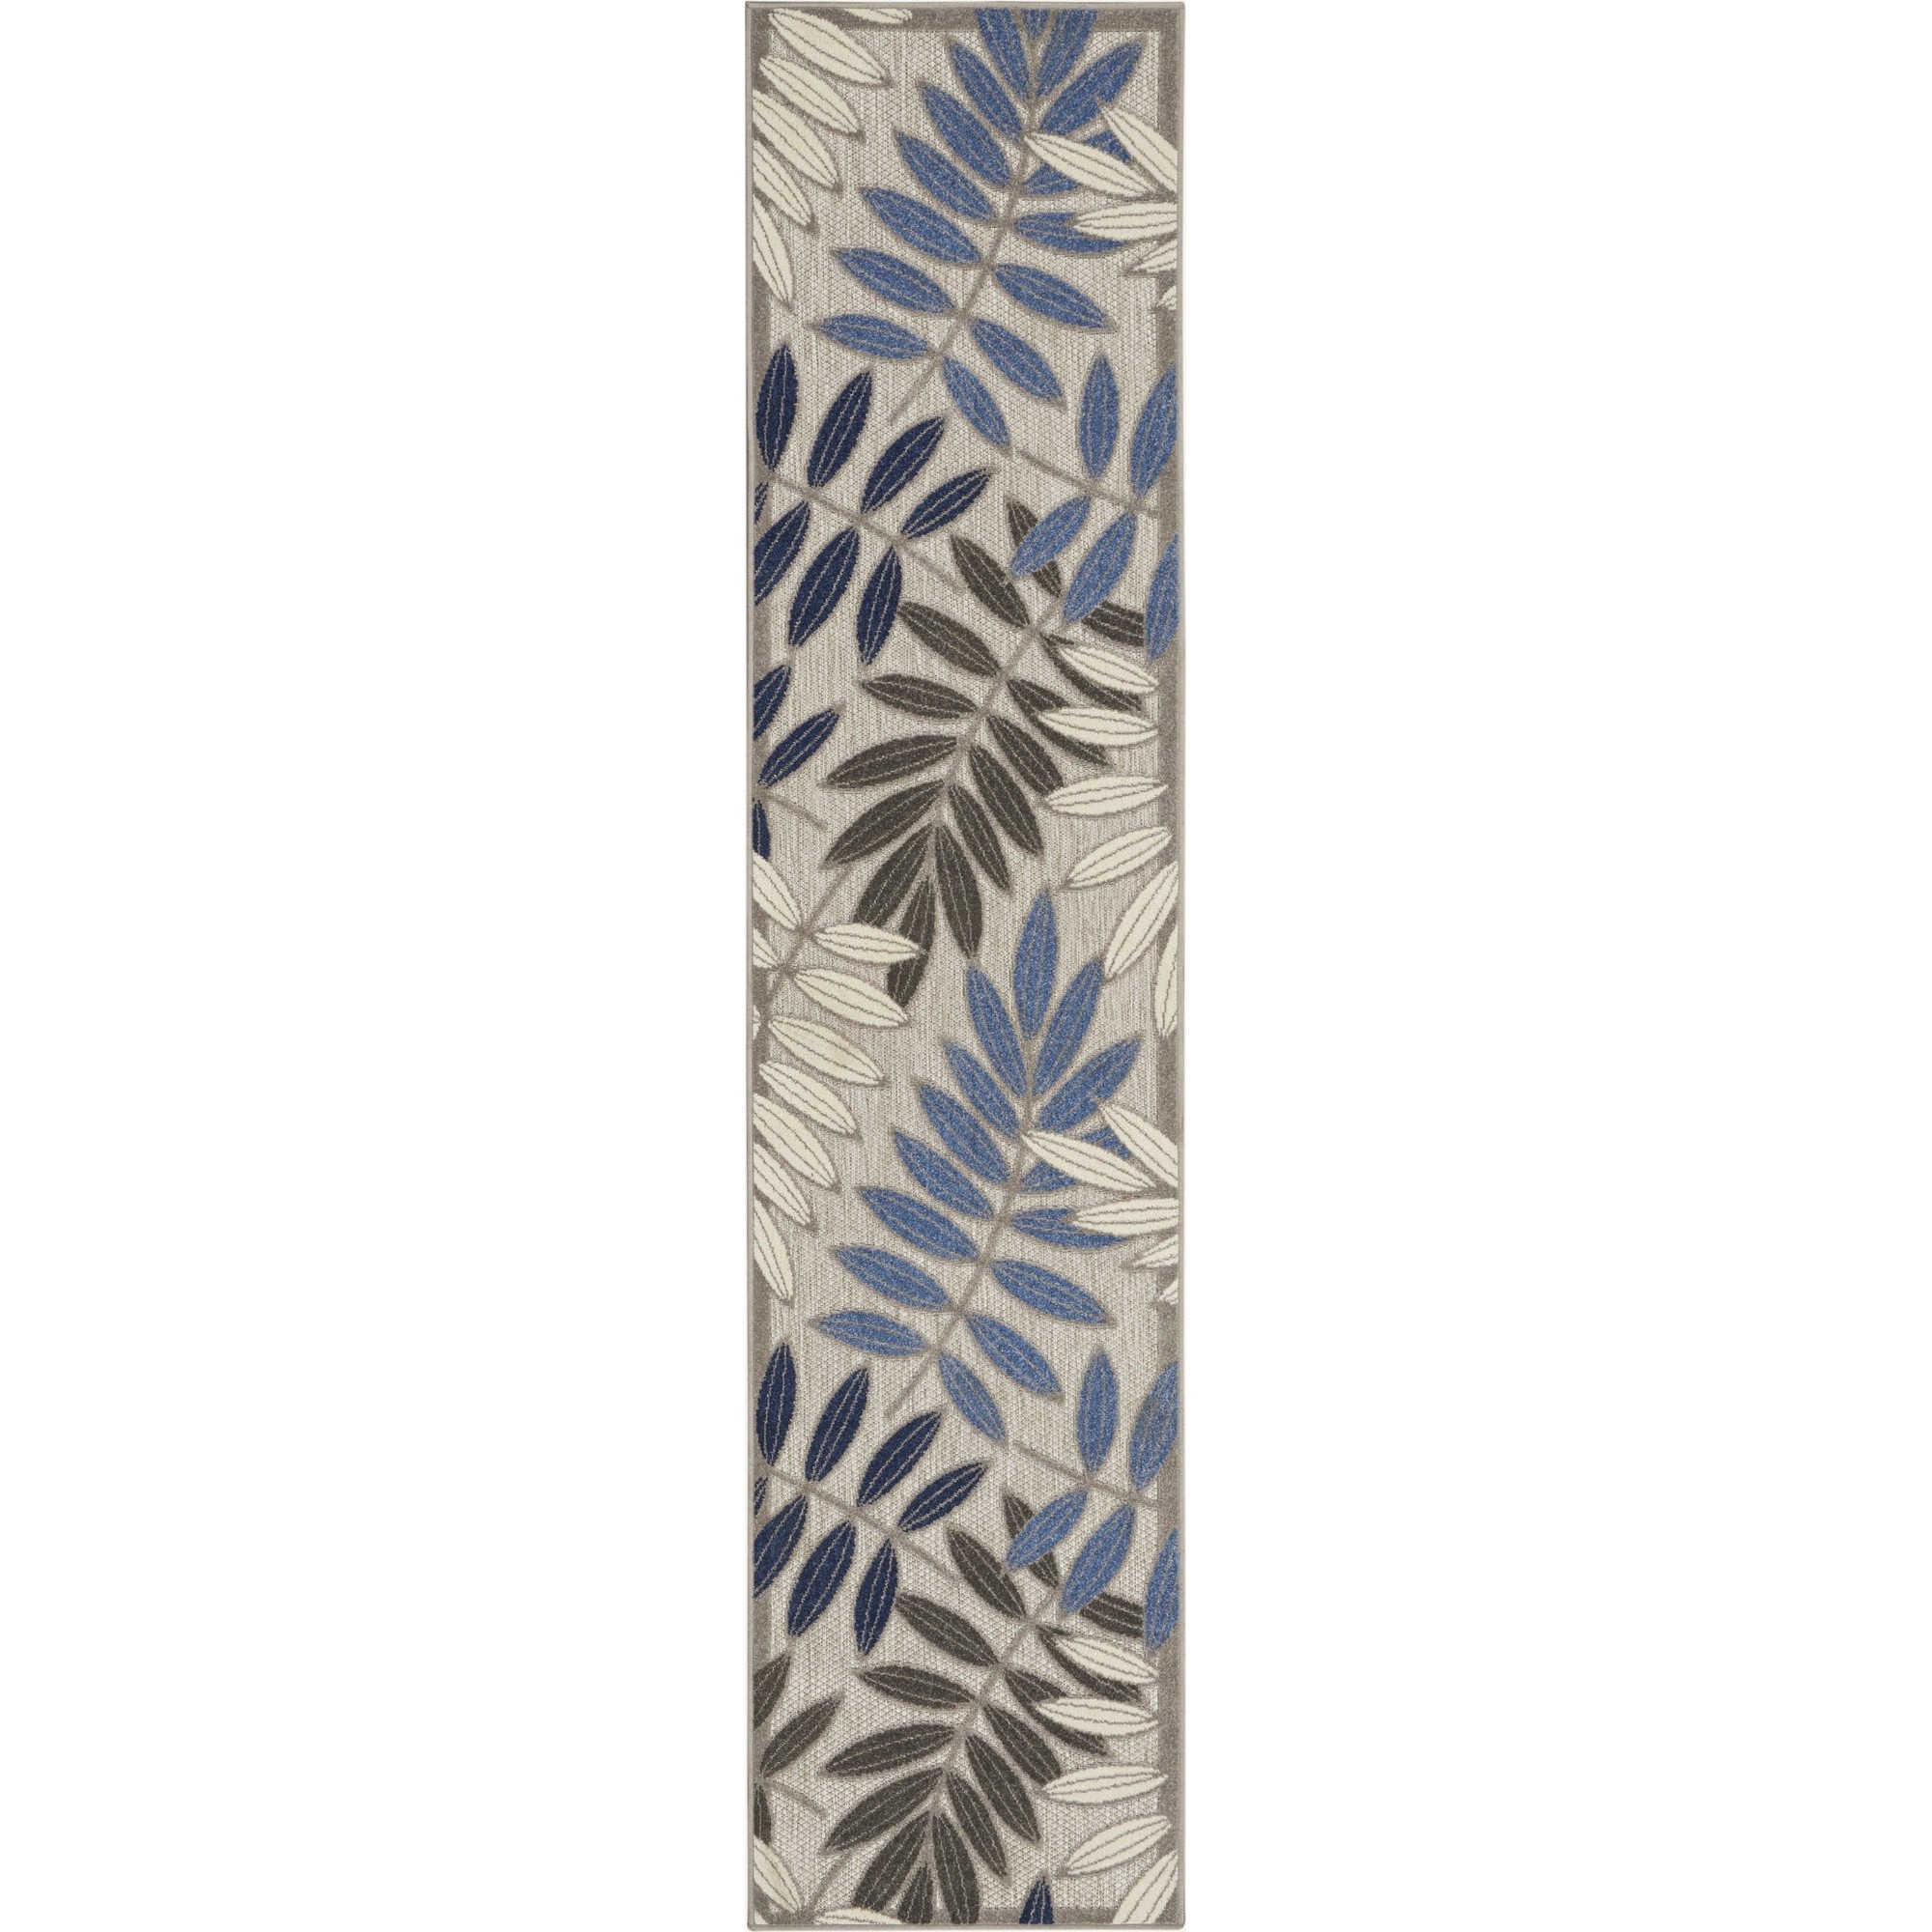 2 x 8 Gray and Blue Leaves Indoor Outdoor Runner Rug